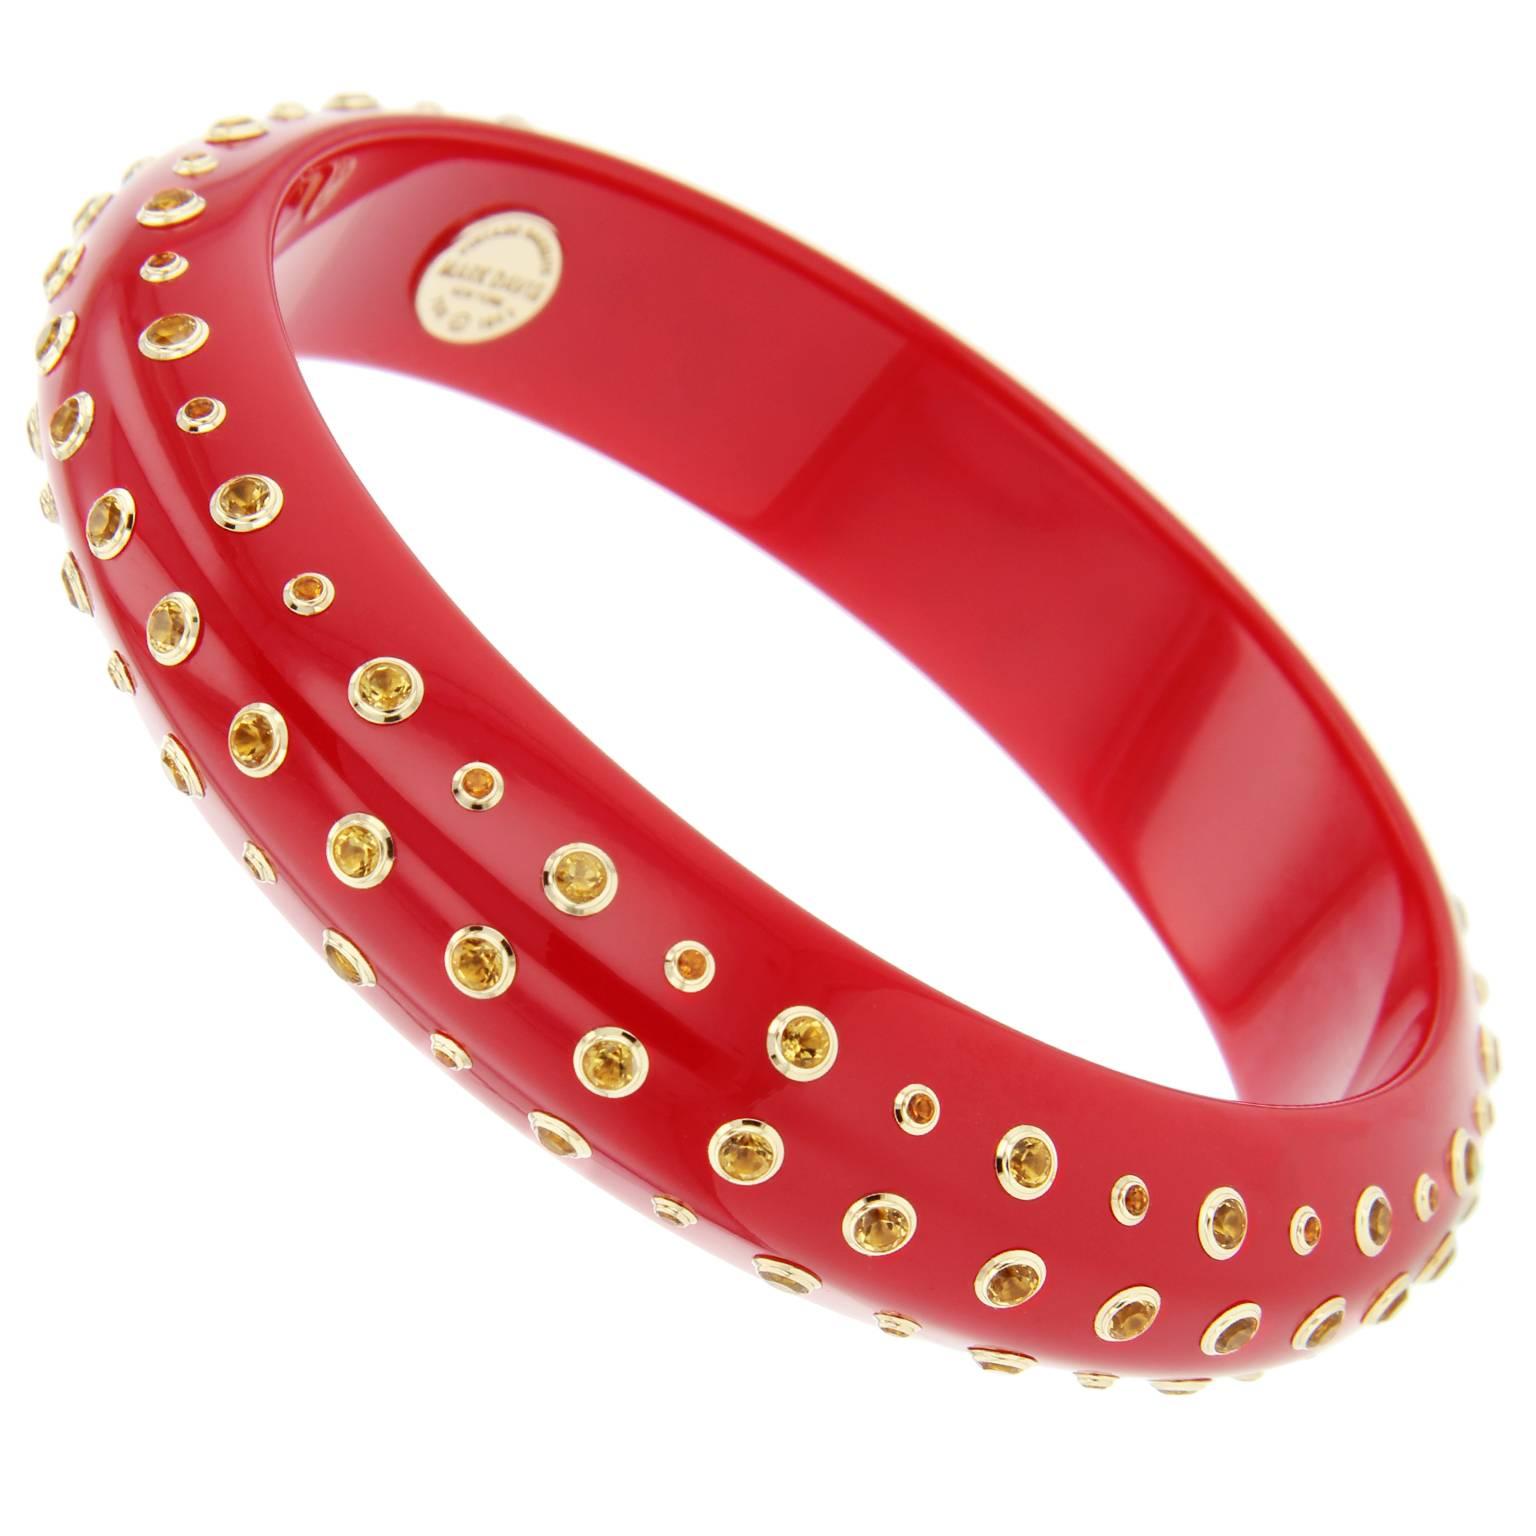 This vibrant Mark Davis bangle was handcrafted using solid red vintage bakelite. Shaped into a knife edge profile, it is precisely studded on all three sides with citrine set in 18k yellow gold bezels. 

Full details below: 
• From the Mark Davis